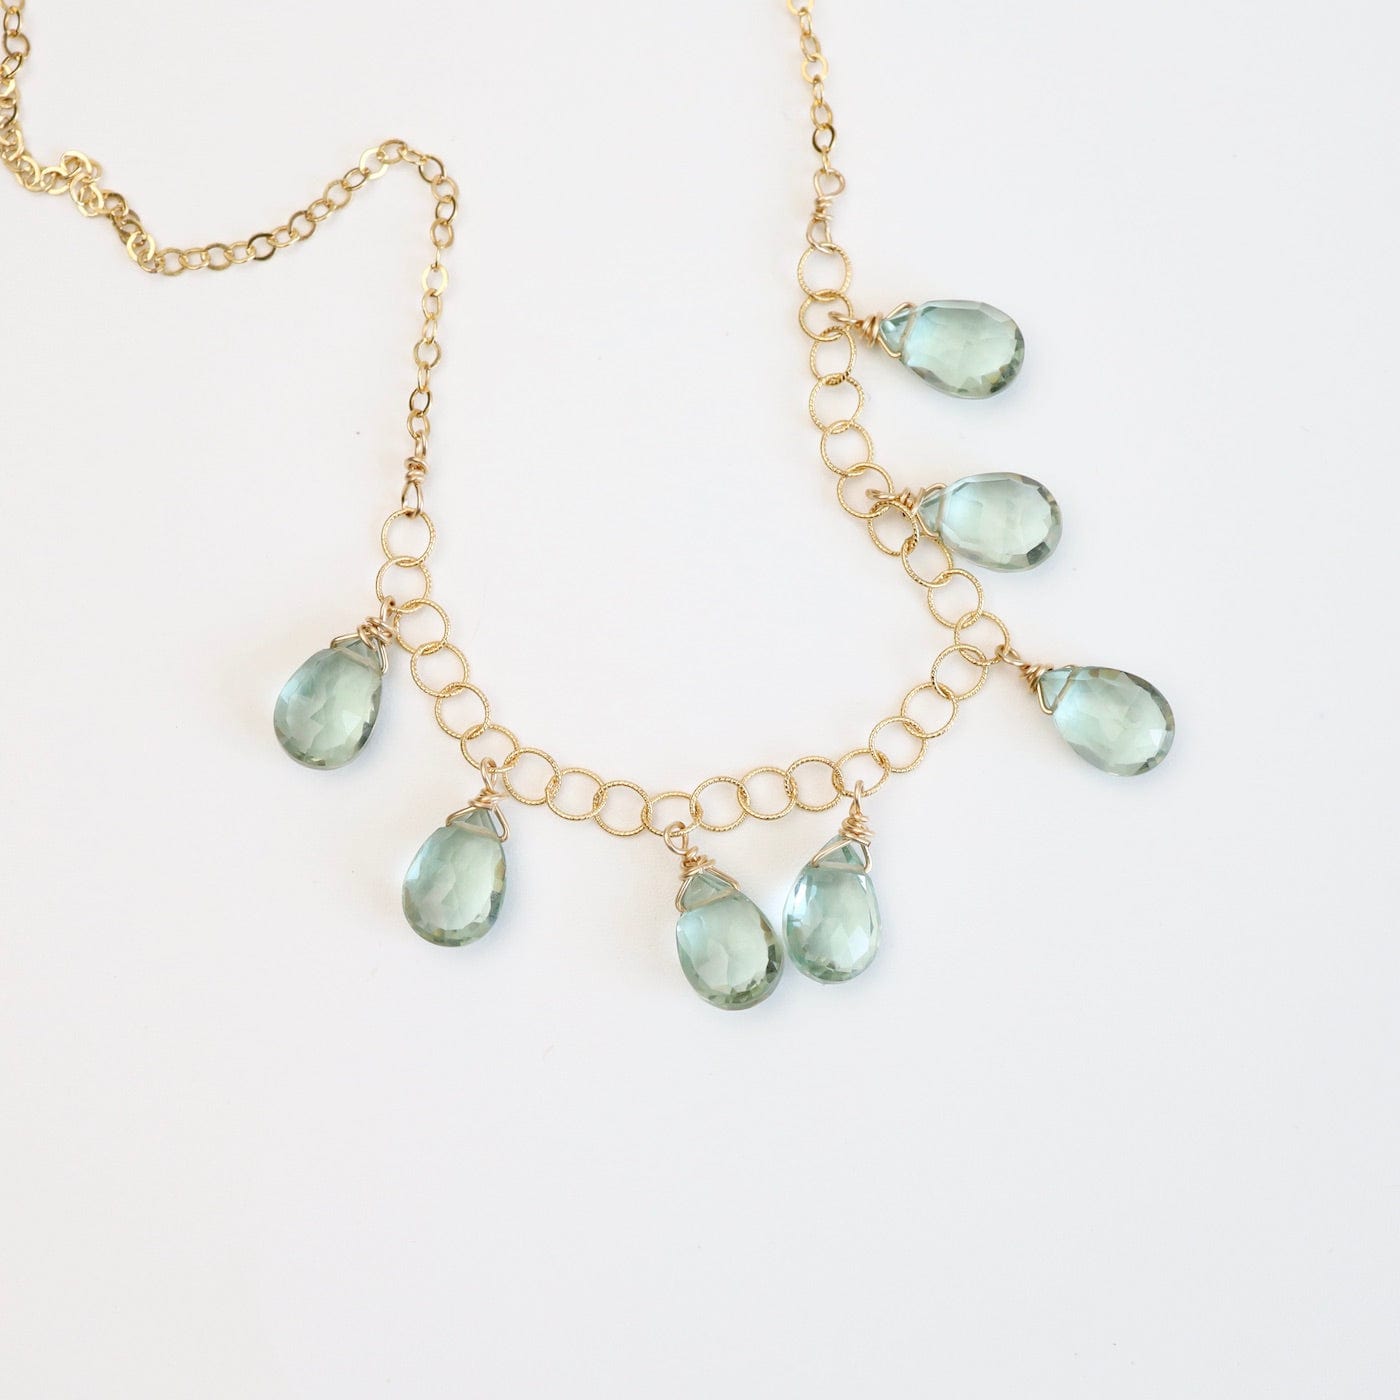 NKL-GF Gold Filled Chain with 7 Green Amethyst Drops  Necklace